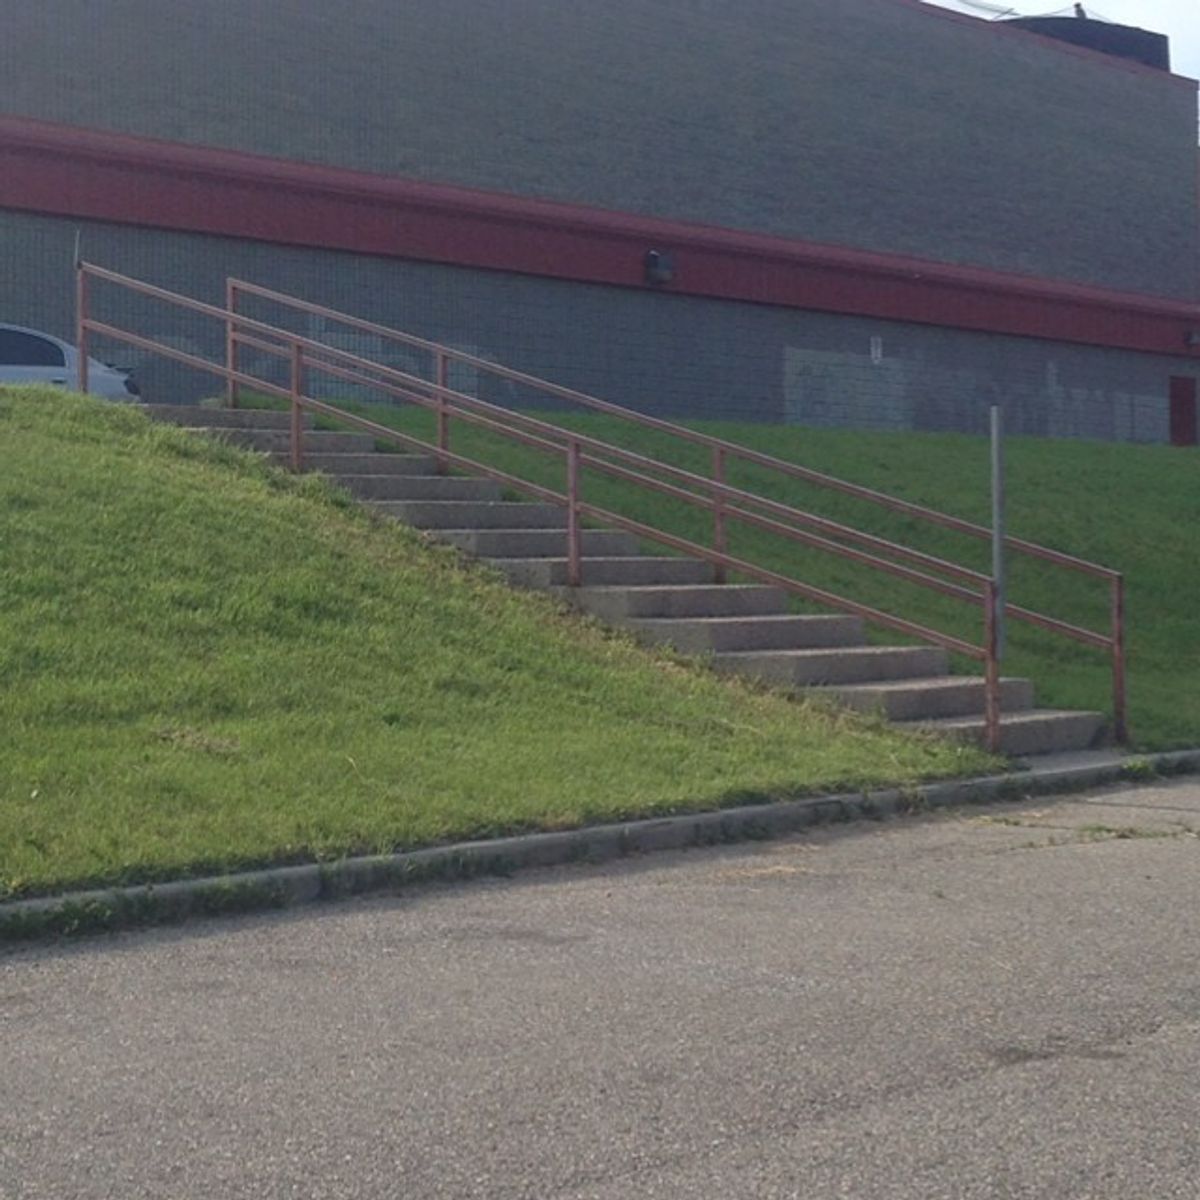 Image for skate spot Acadia Recreation Complex - 13 Stair Rail